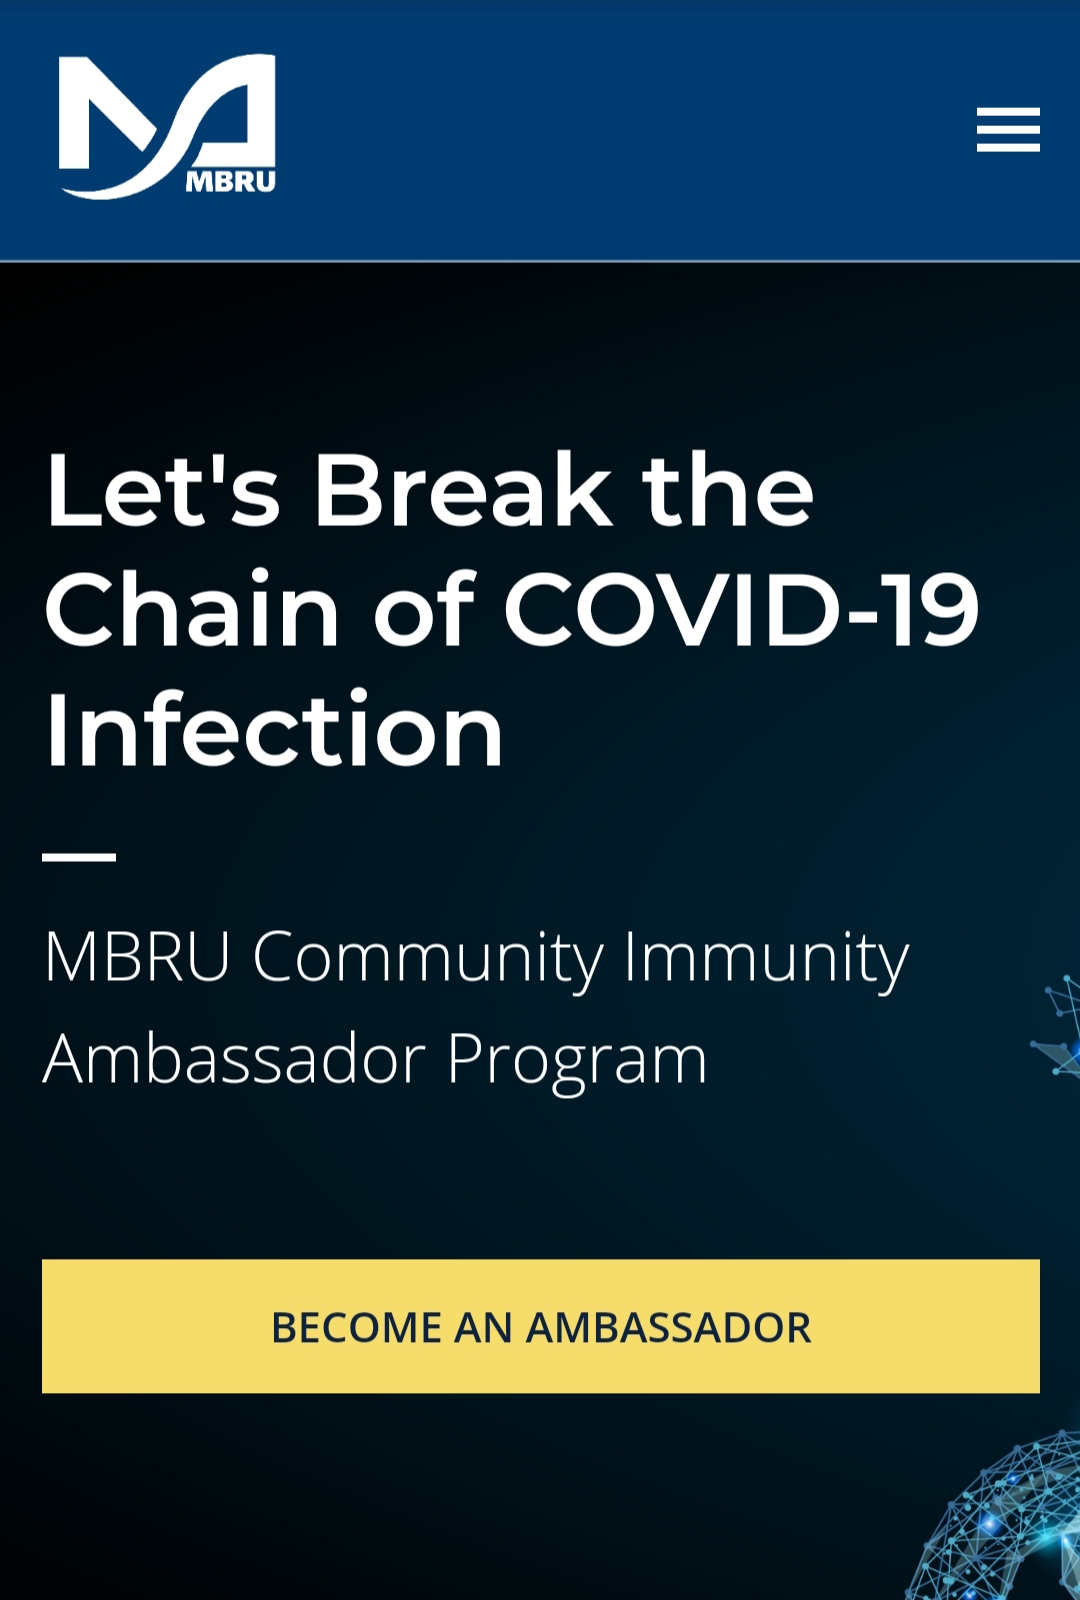 LET'S BREAK THE CHAIN OF COVID-19 INFECTION